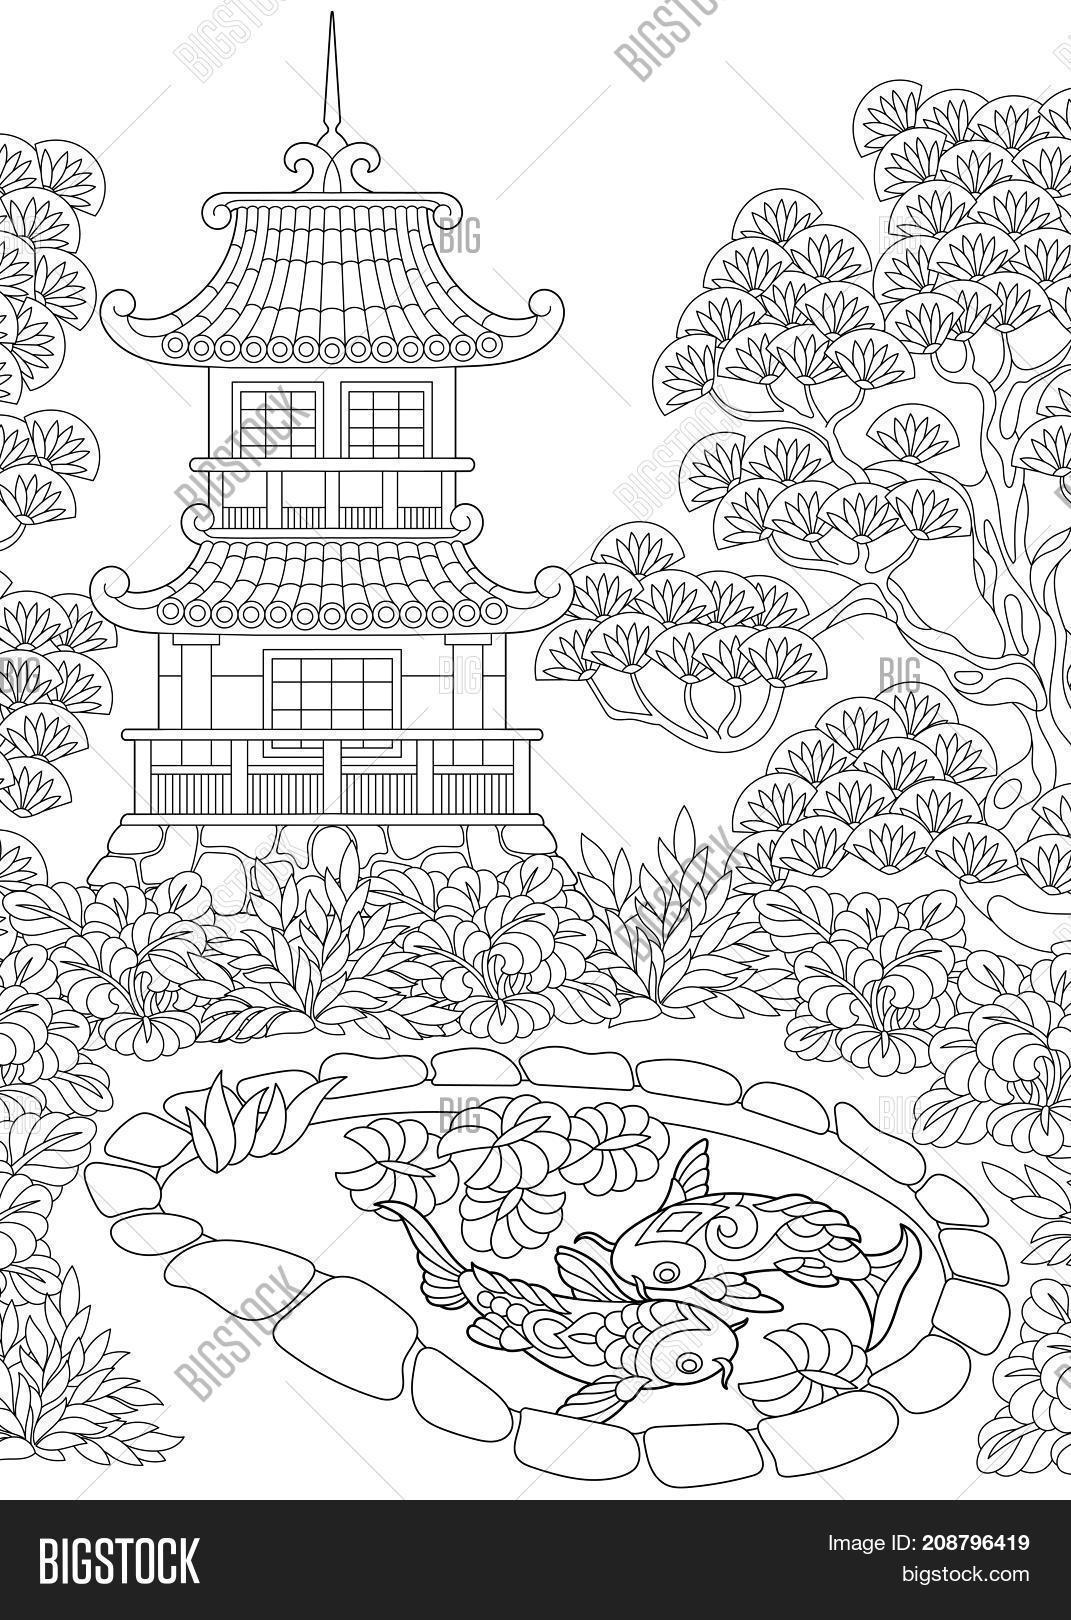 Coloring page oriental image photo free trial bigstock